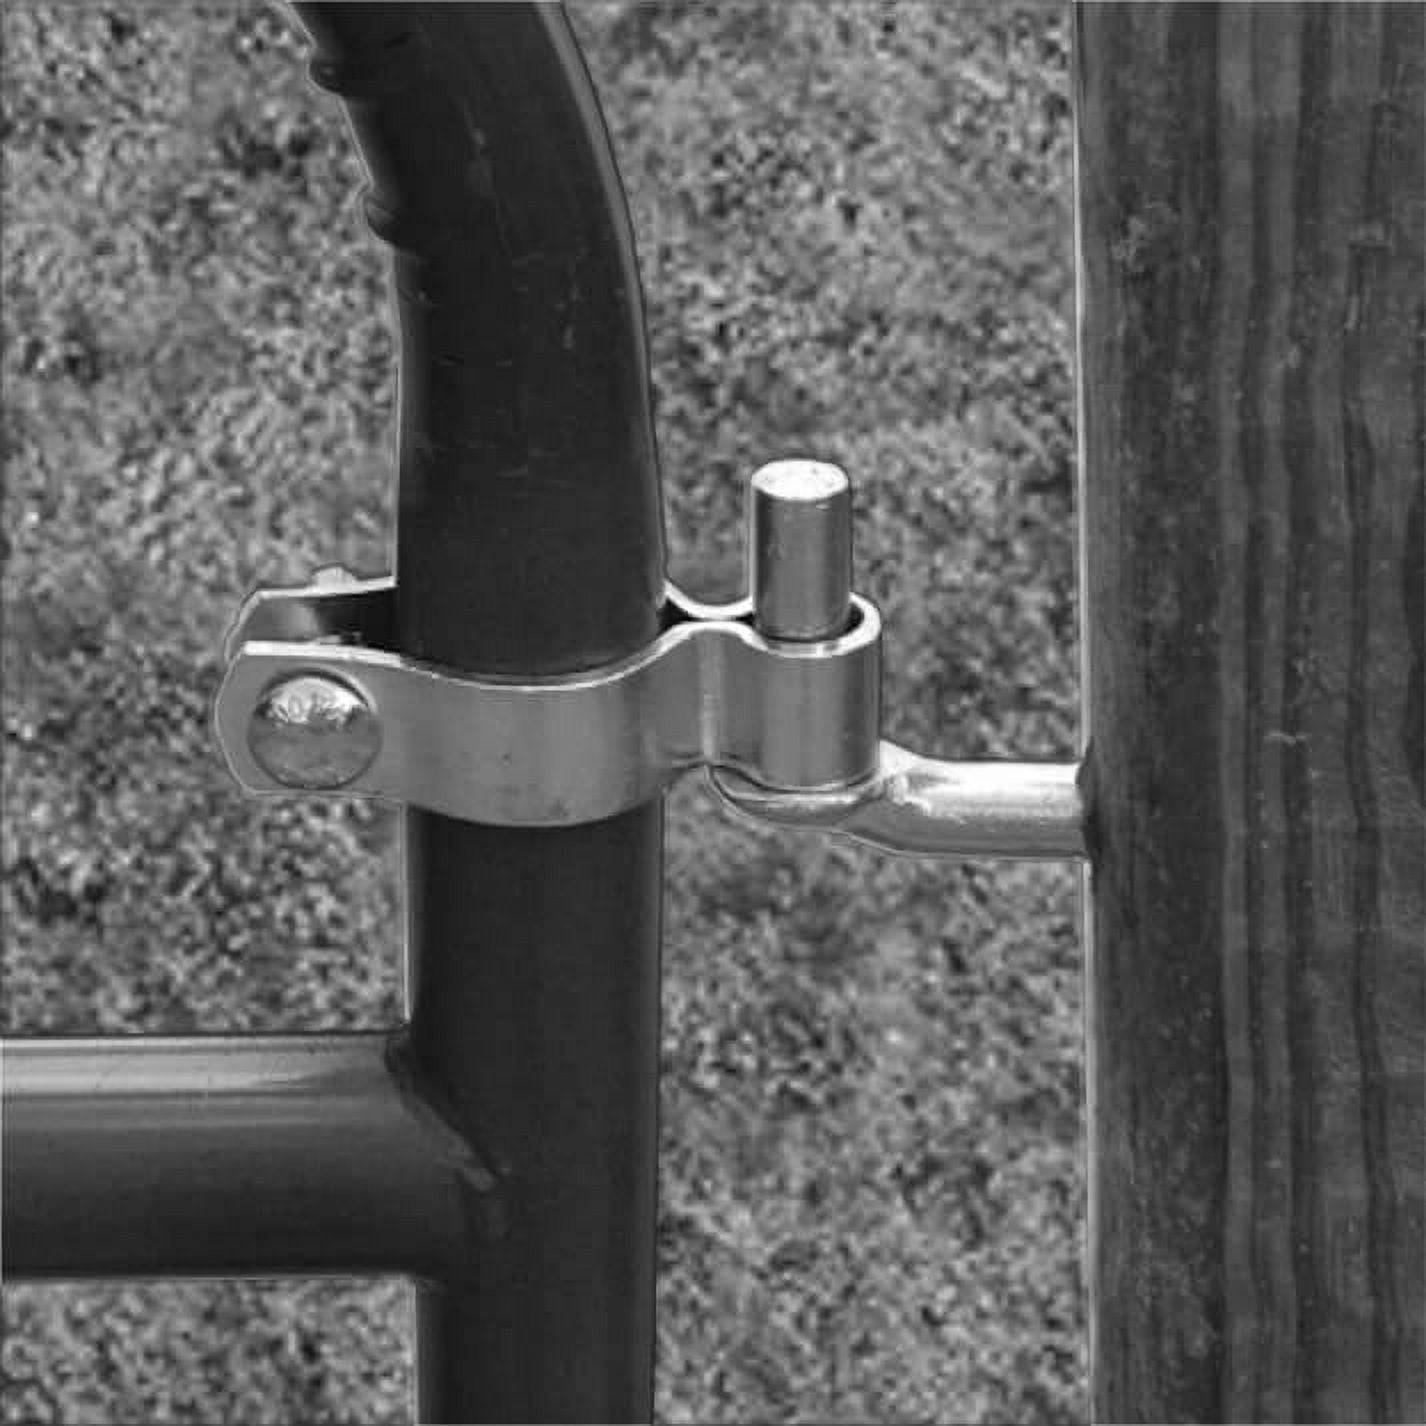 Jake Sales Brand 4-1/2" Lag Screw Hinge with 5/8" Pin Install Gate Hinge  Into Wood Post Galvanized Pack